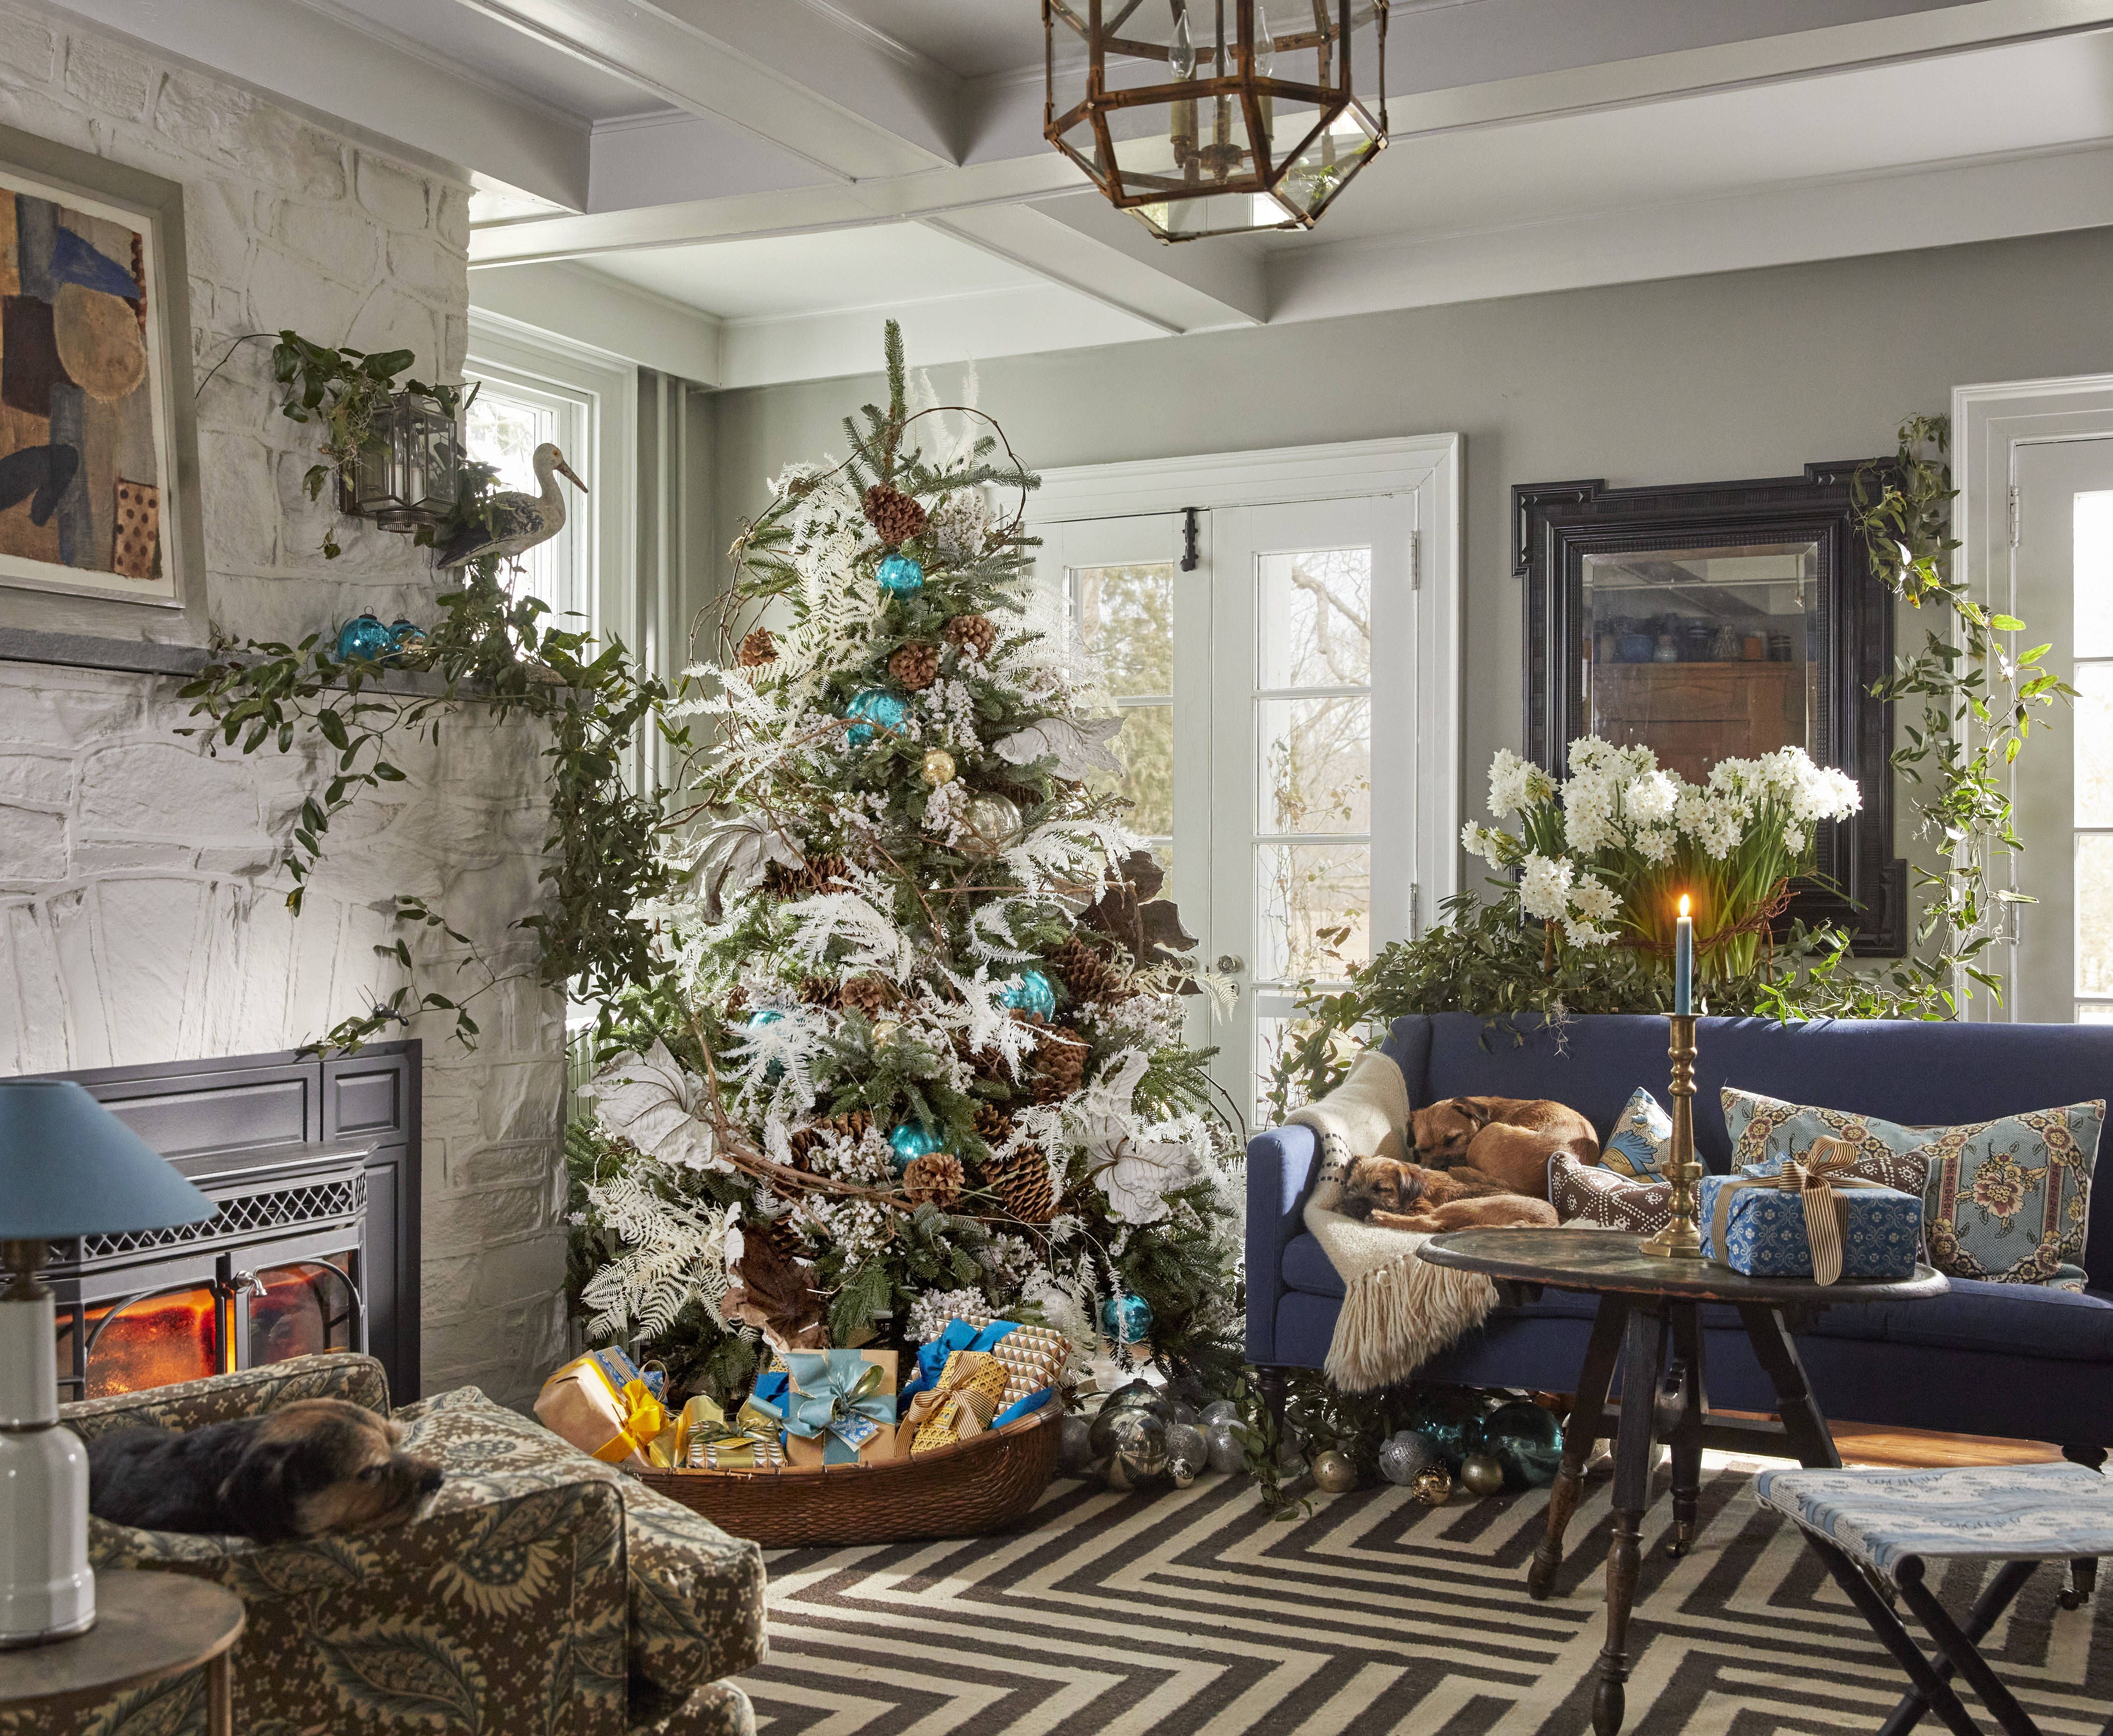 20 Christmas decorating ideas from cozy to bold | Livingetc